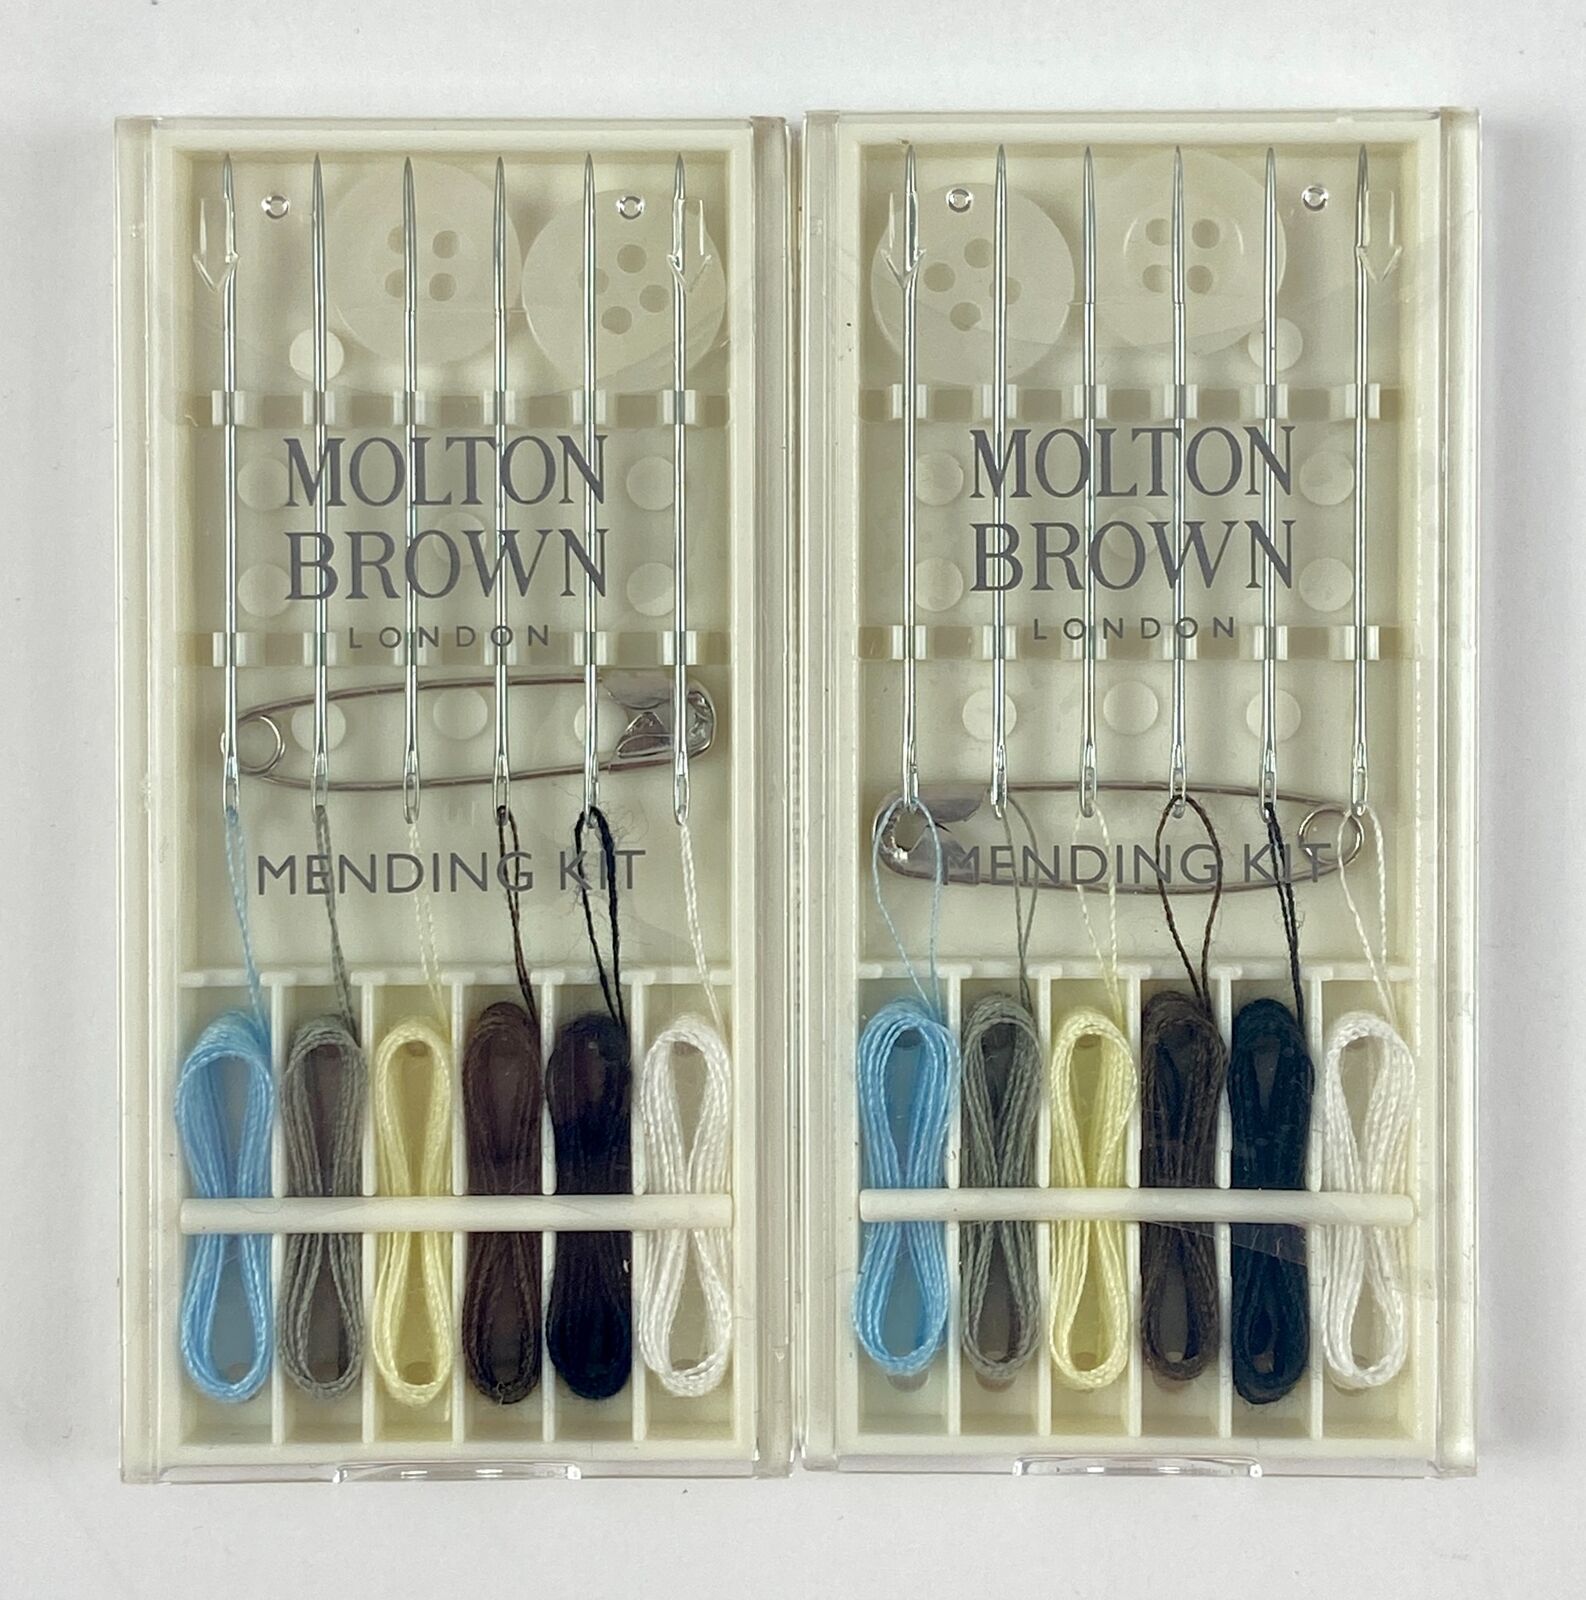 Molton Brown Mending Kit Luxury Collection for Travel Set of 2